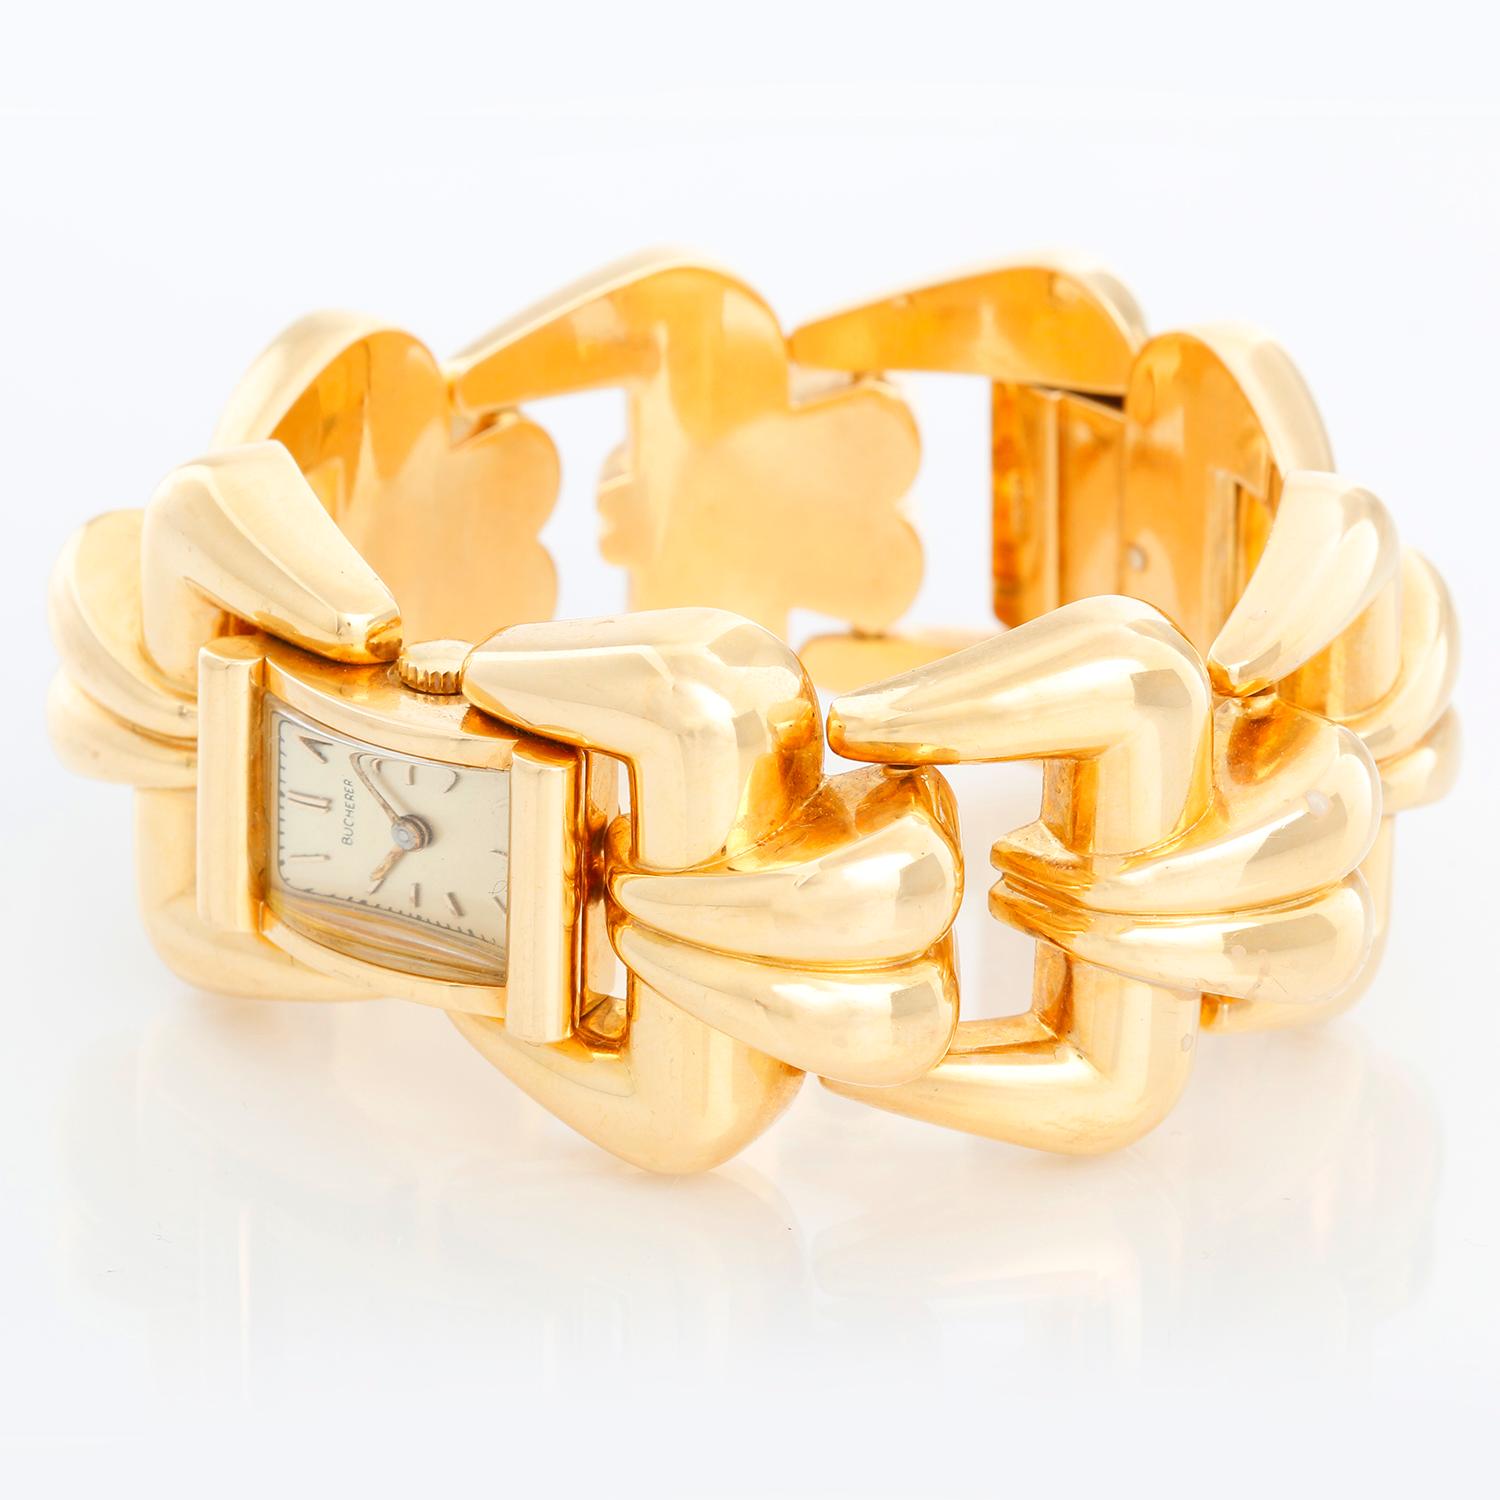 Bucherer 18K Yellow Gold Ladies Wristwatch - Manual winding. 18K Yellow gold rectangular case ( 15 x 23 ). Silver dial with stick hour markers. 18K Yellow gold lobed links; will fit a 6 1/2 inch wrist. Pre-owned with custom box; Circa 1940's .